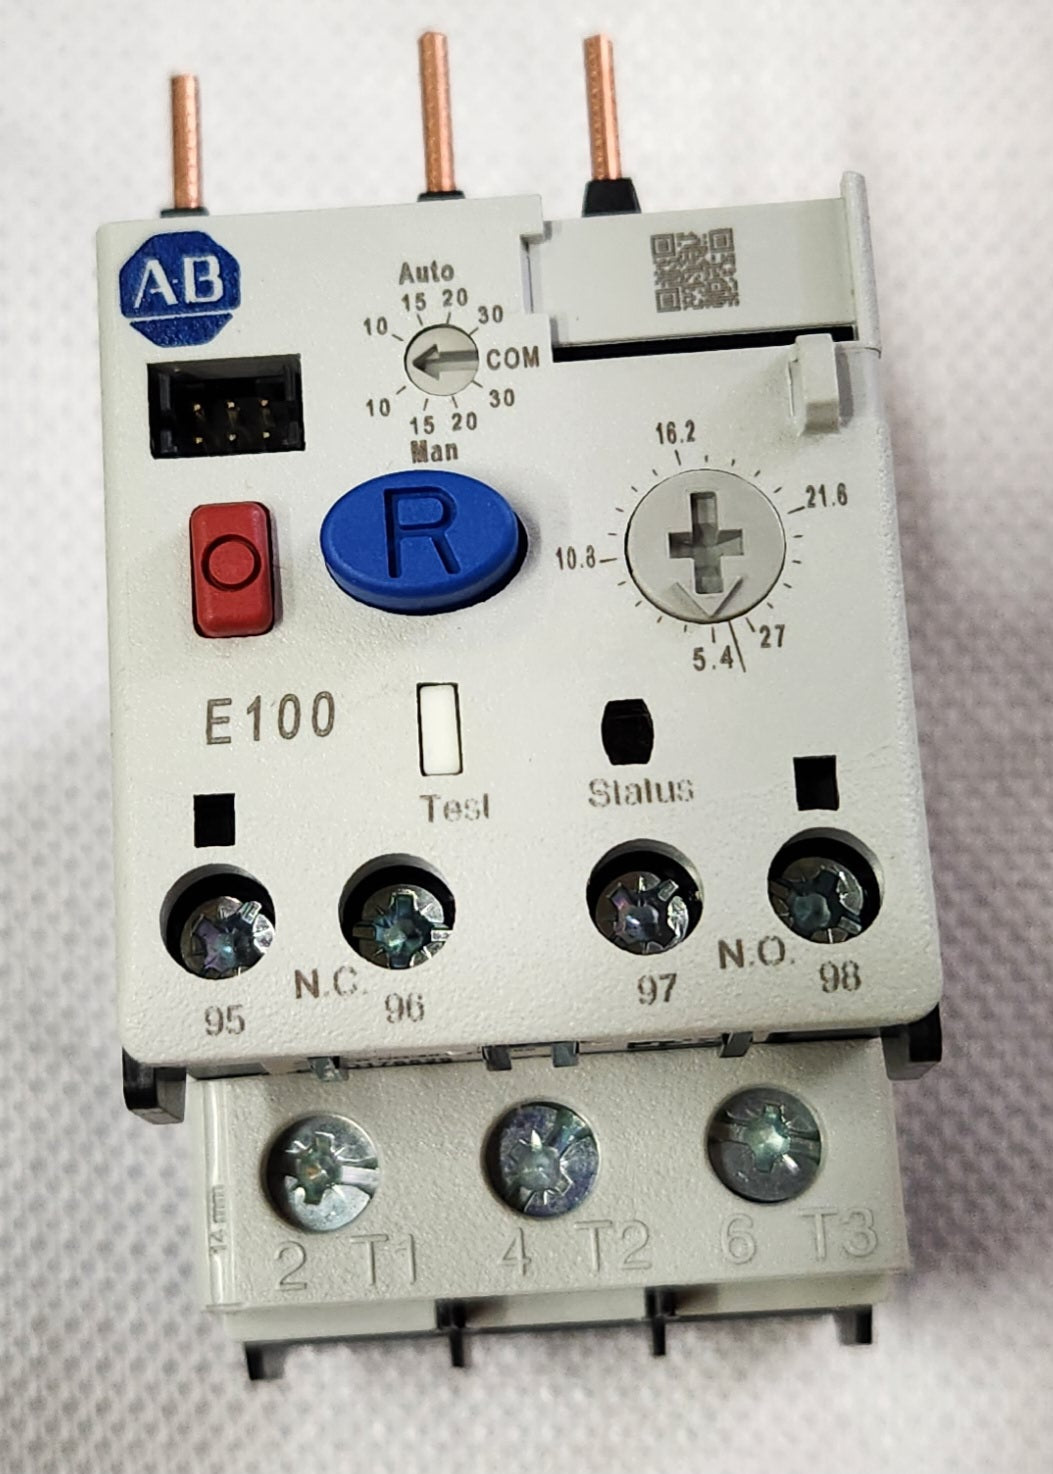 P0009878 A - Relay, Overload, 5.4-27 Amp